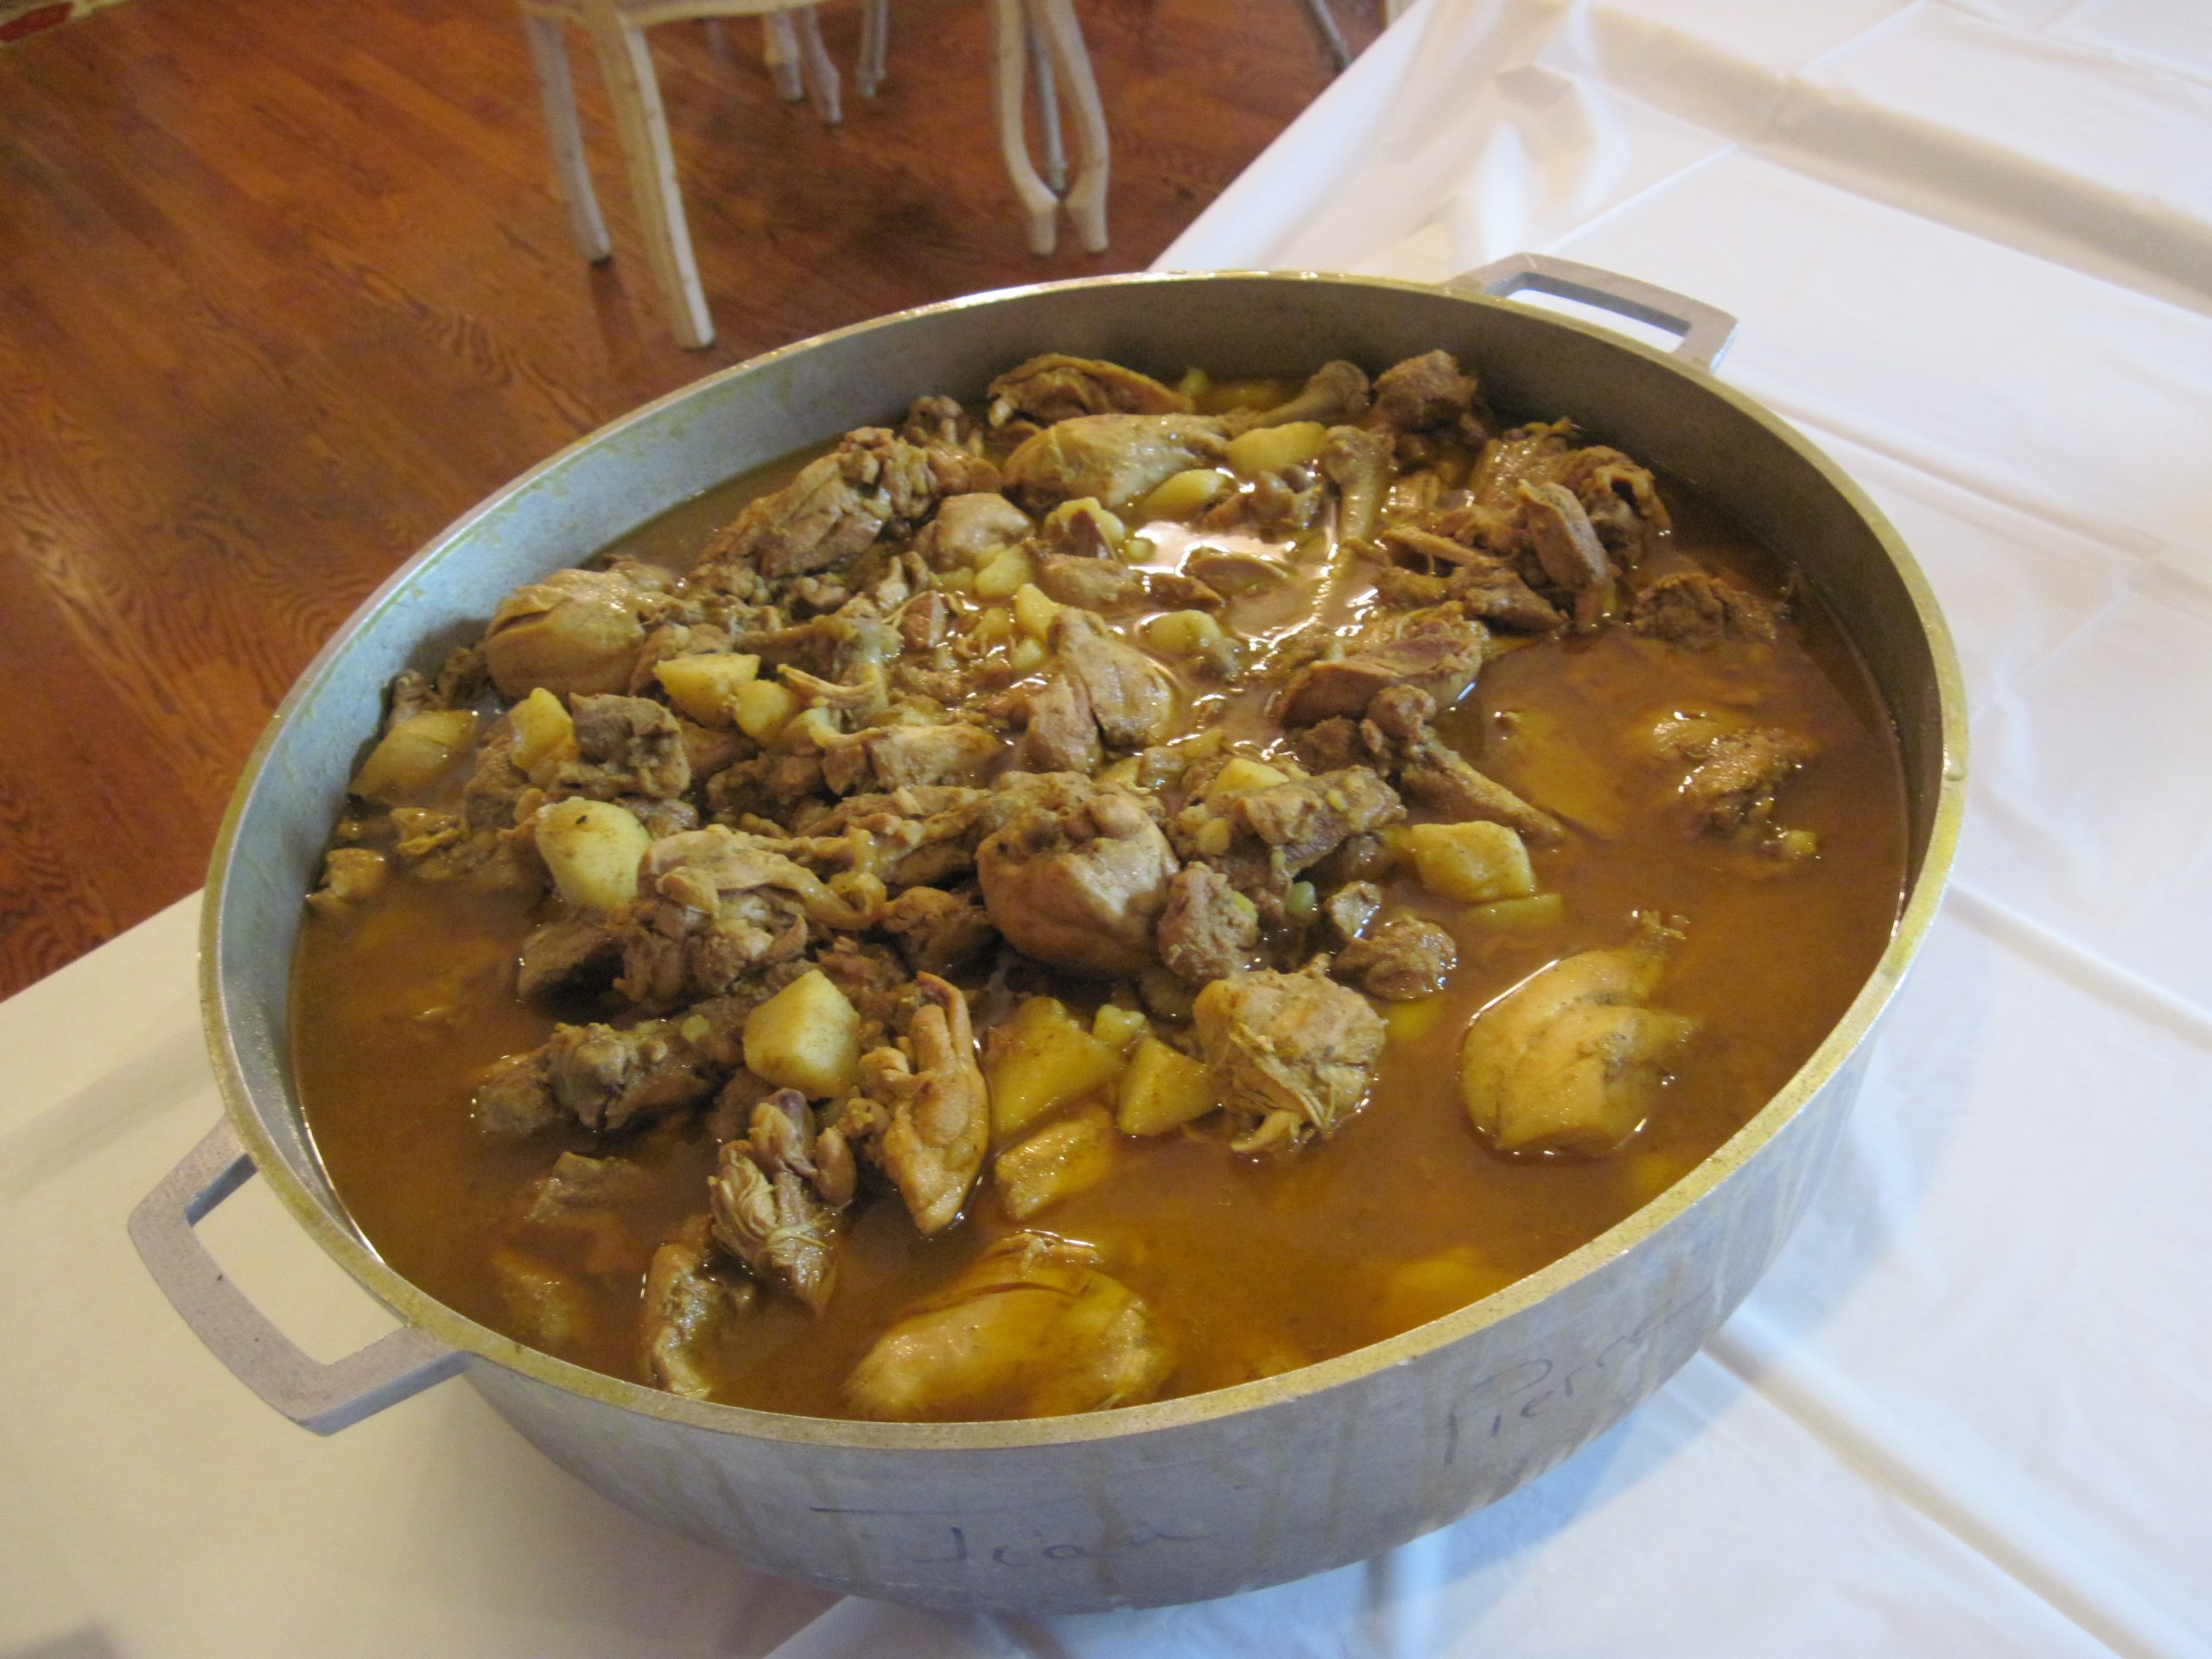 pic of Trinibago curry goat at family reunion